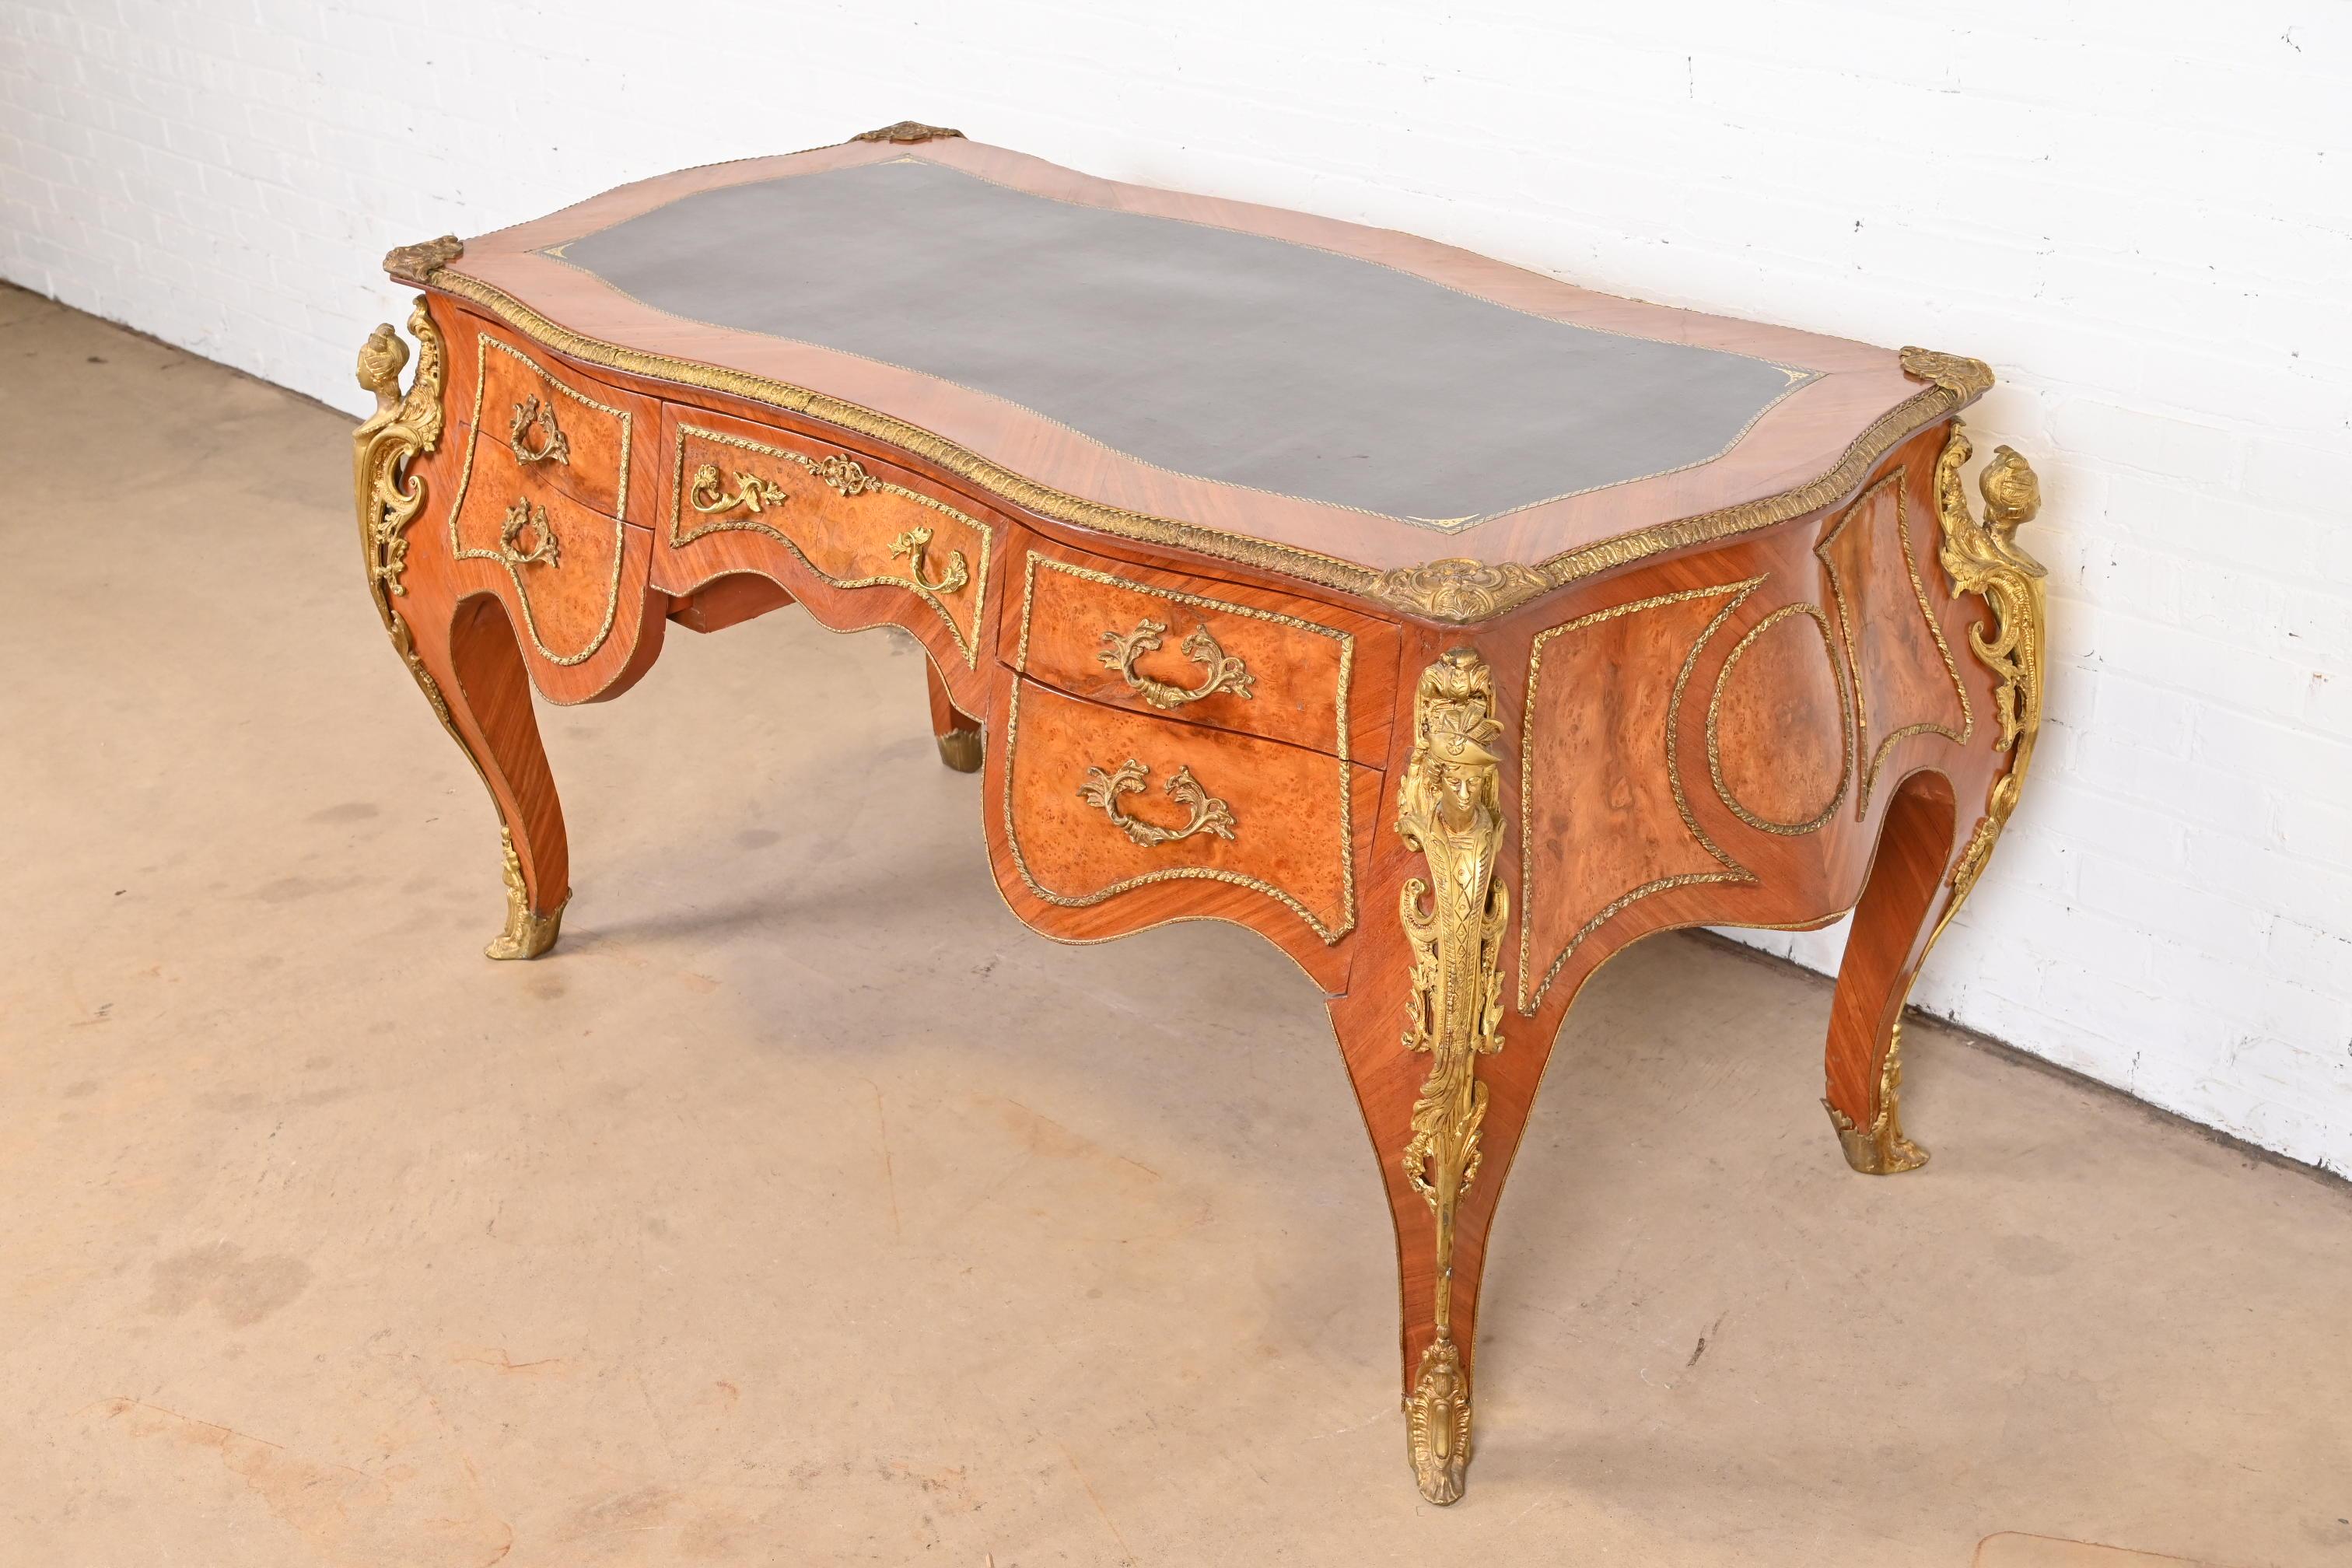 20th Century French Louis XV Kingwood and Burl Wood Bureau Plat Leather Top Desk with Ormolu For Sale